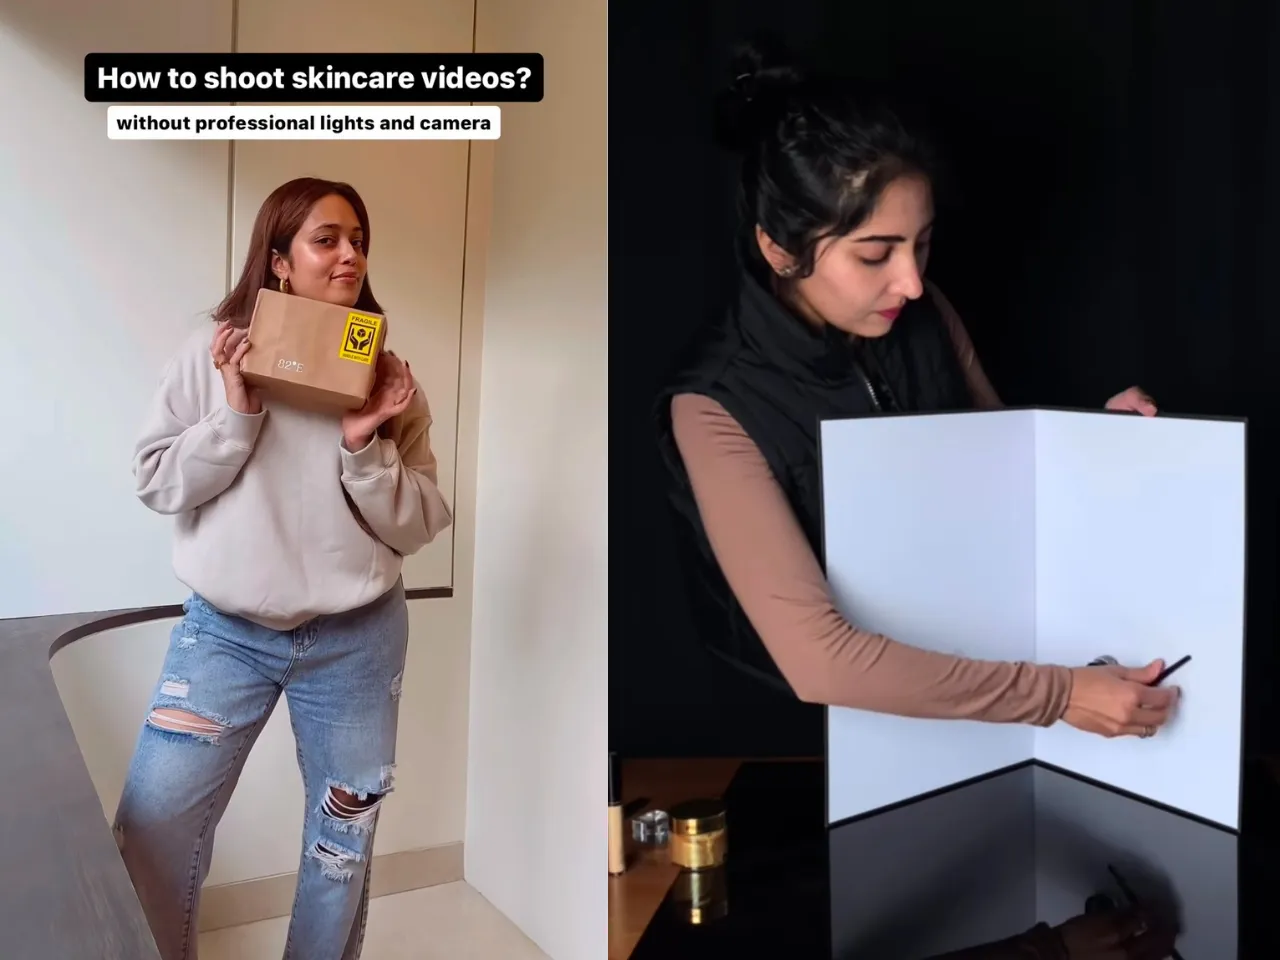 Creators help you find ways to shoot product videos with limited resources